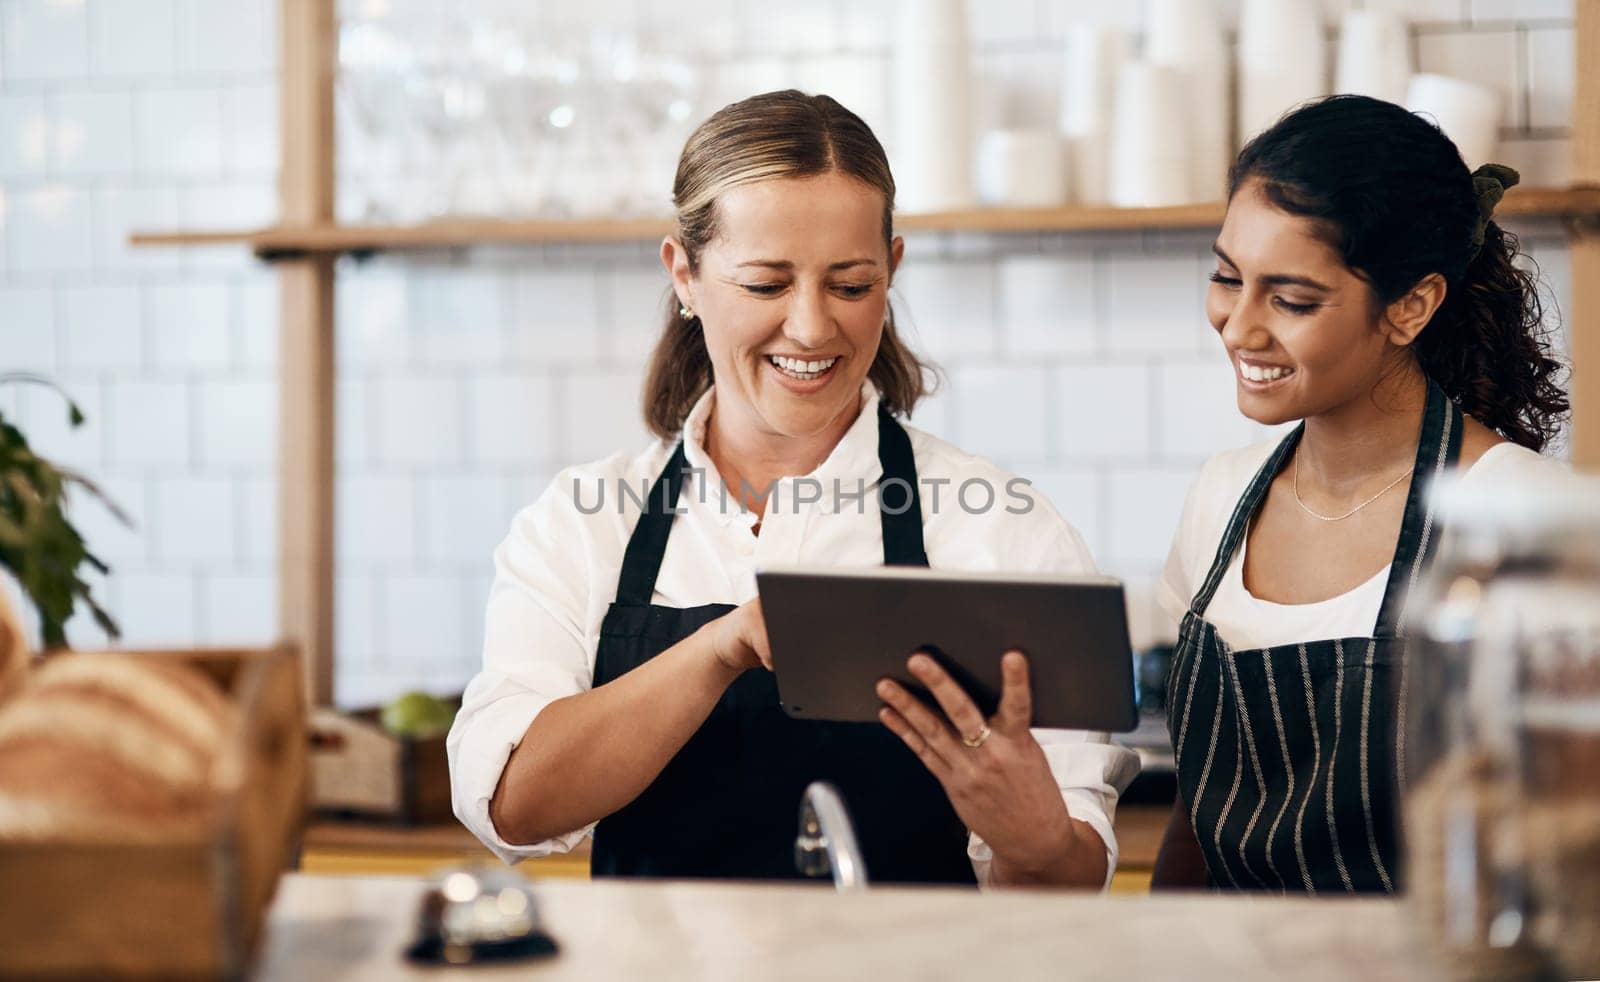 Modern tech makes them a more productive team. two women using a digital tablet together while working in a cafe